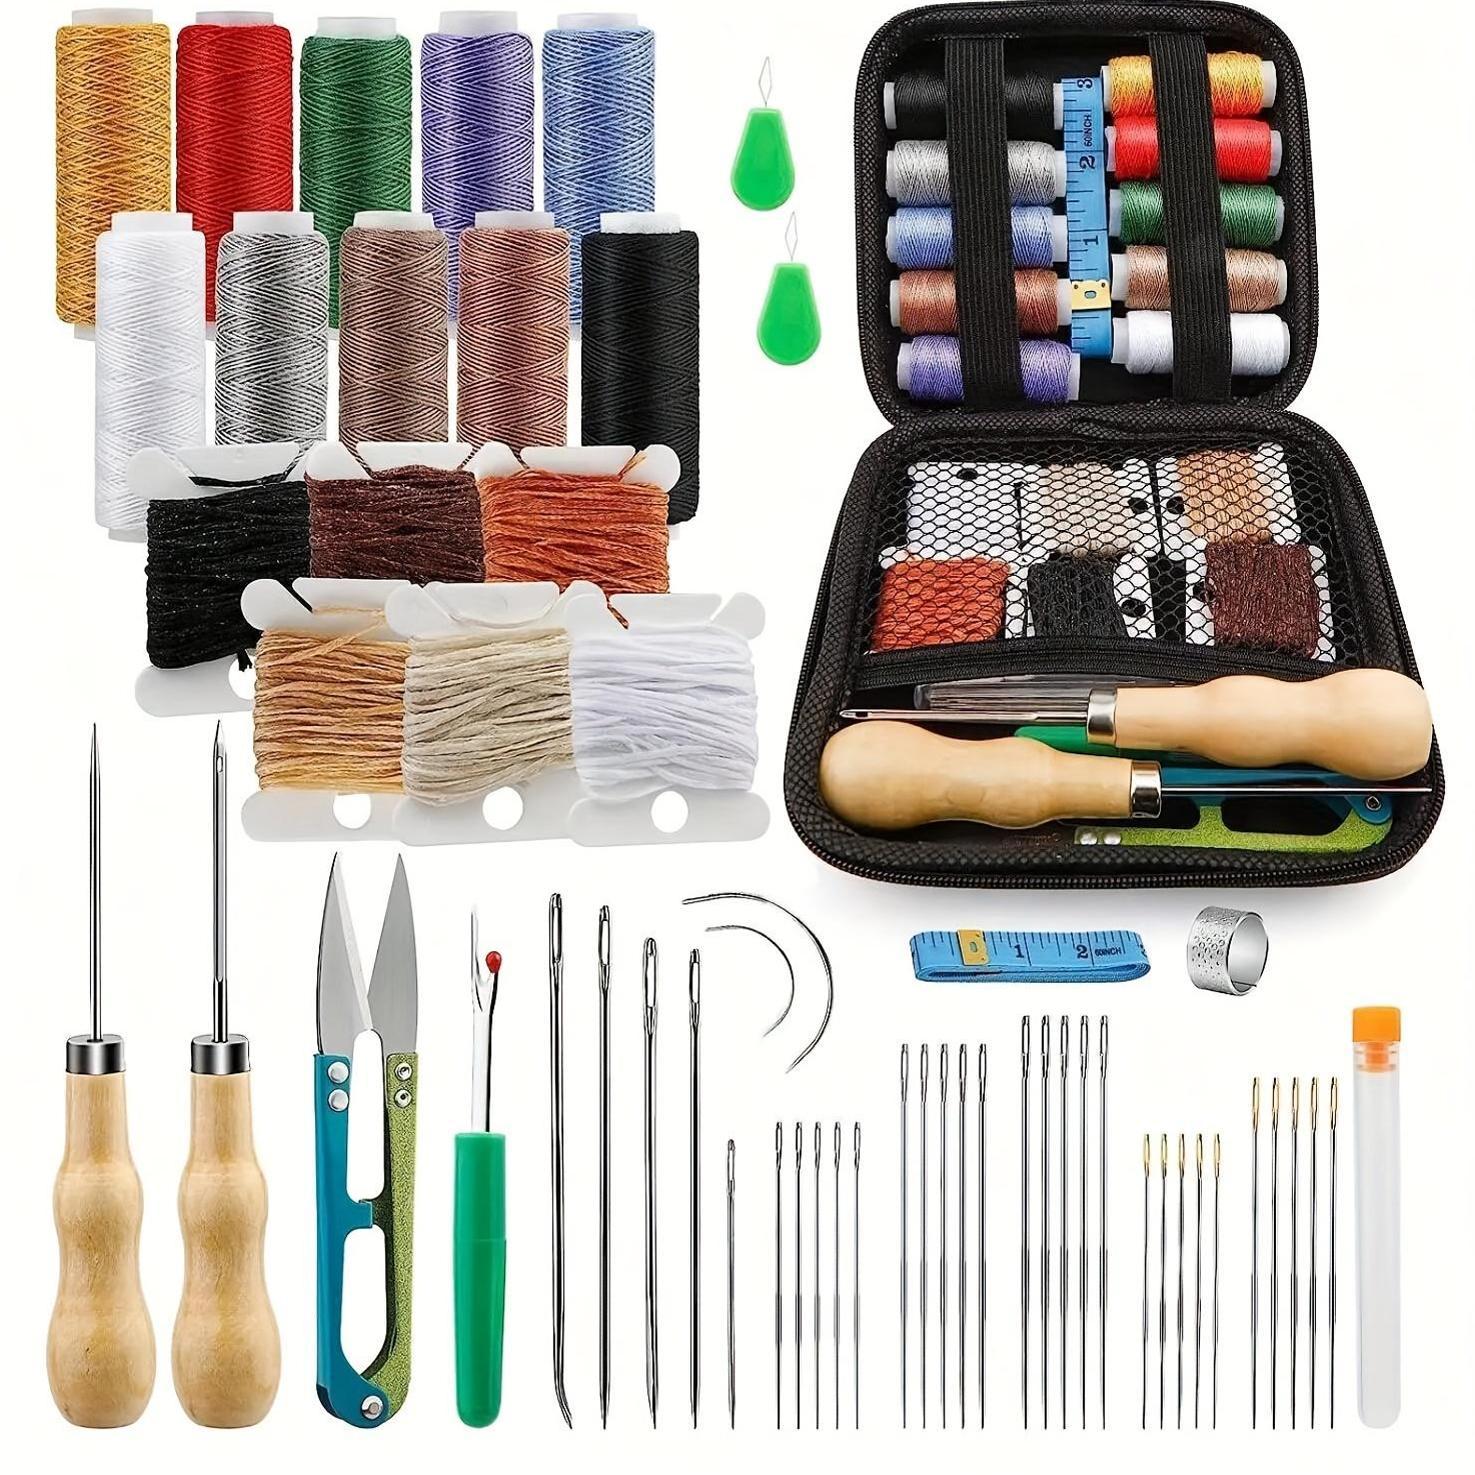 

comprehensive Set" 59-piece Leather Sewing Kit With Heavy-duty Needles, Waxed Thread & Large Eye Stitching Pins - Ideal For Car Seats, Backpacks, Rugs, Boots, Canvas & Sofas